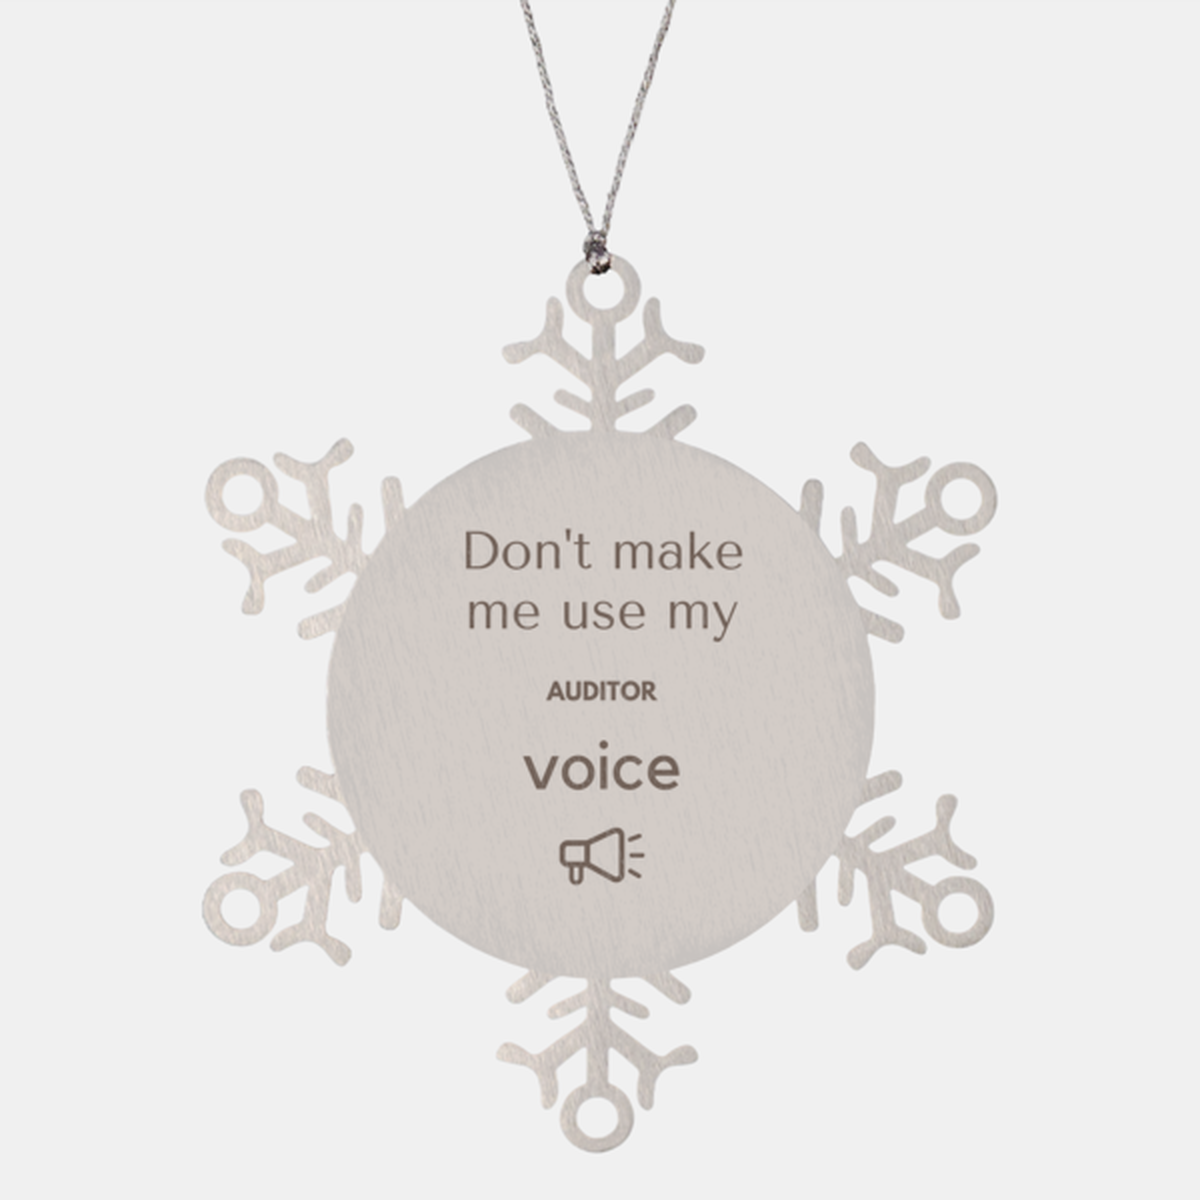 Don't make me use my Auditor voice, Sarcasm Auditor Ornament Gifts, Christmas Auditor Snowflake Ornament Unique Gifts For Auditor Coworkers, Men, Women, Colleague, Friends